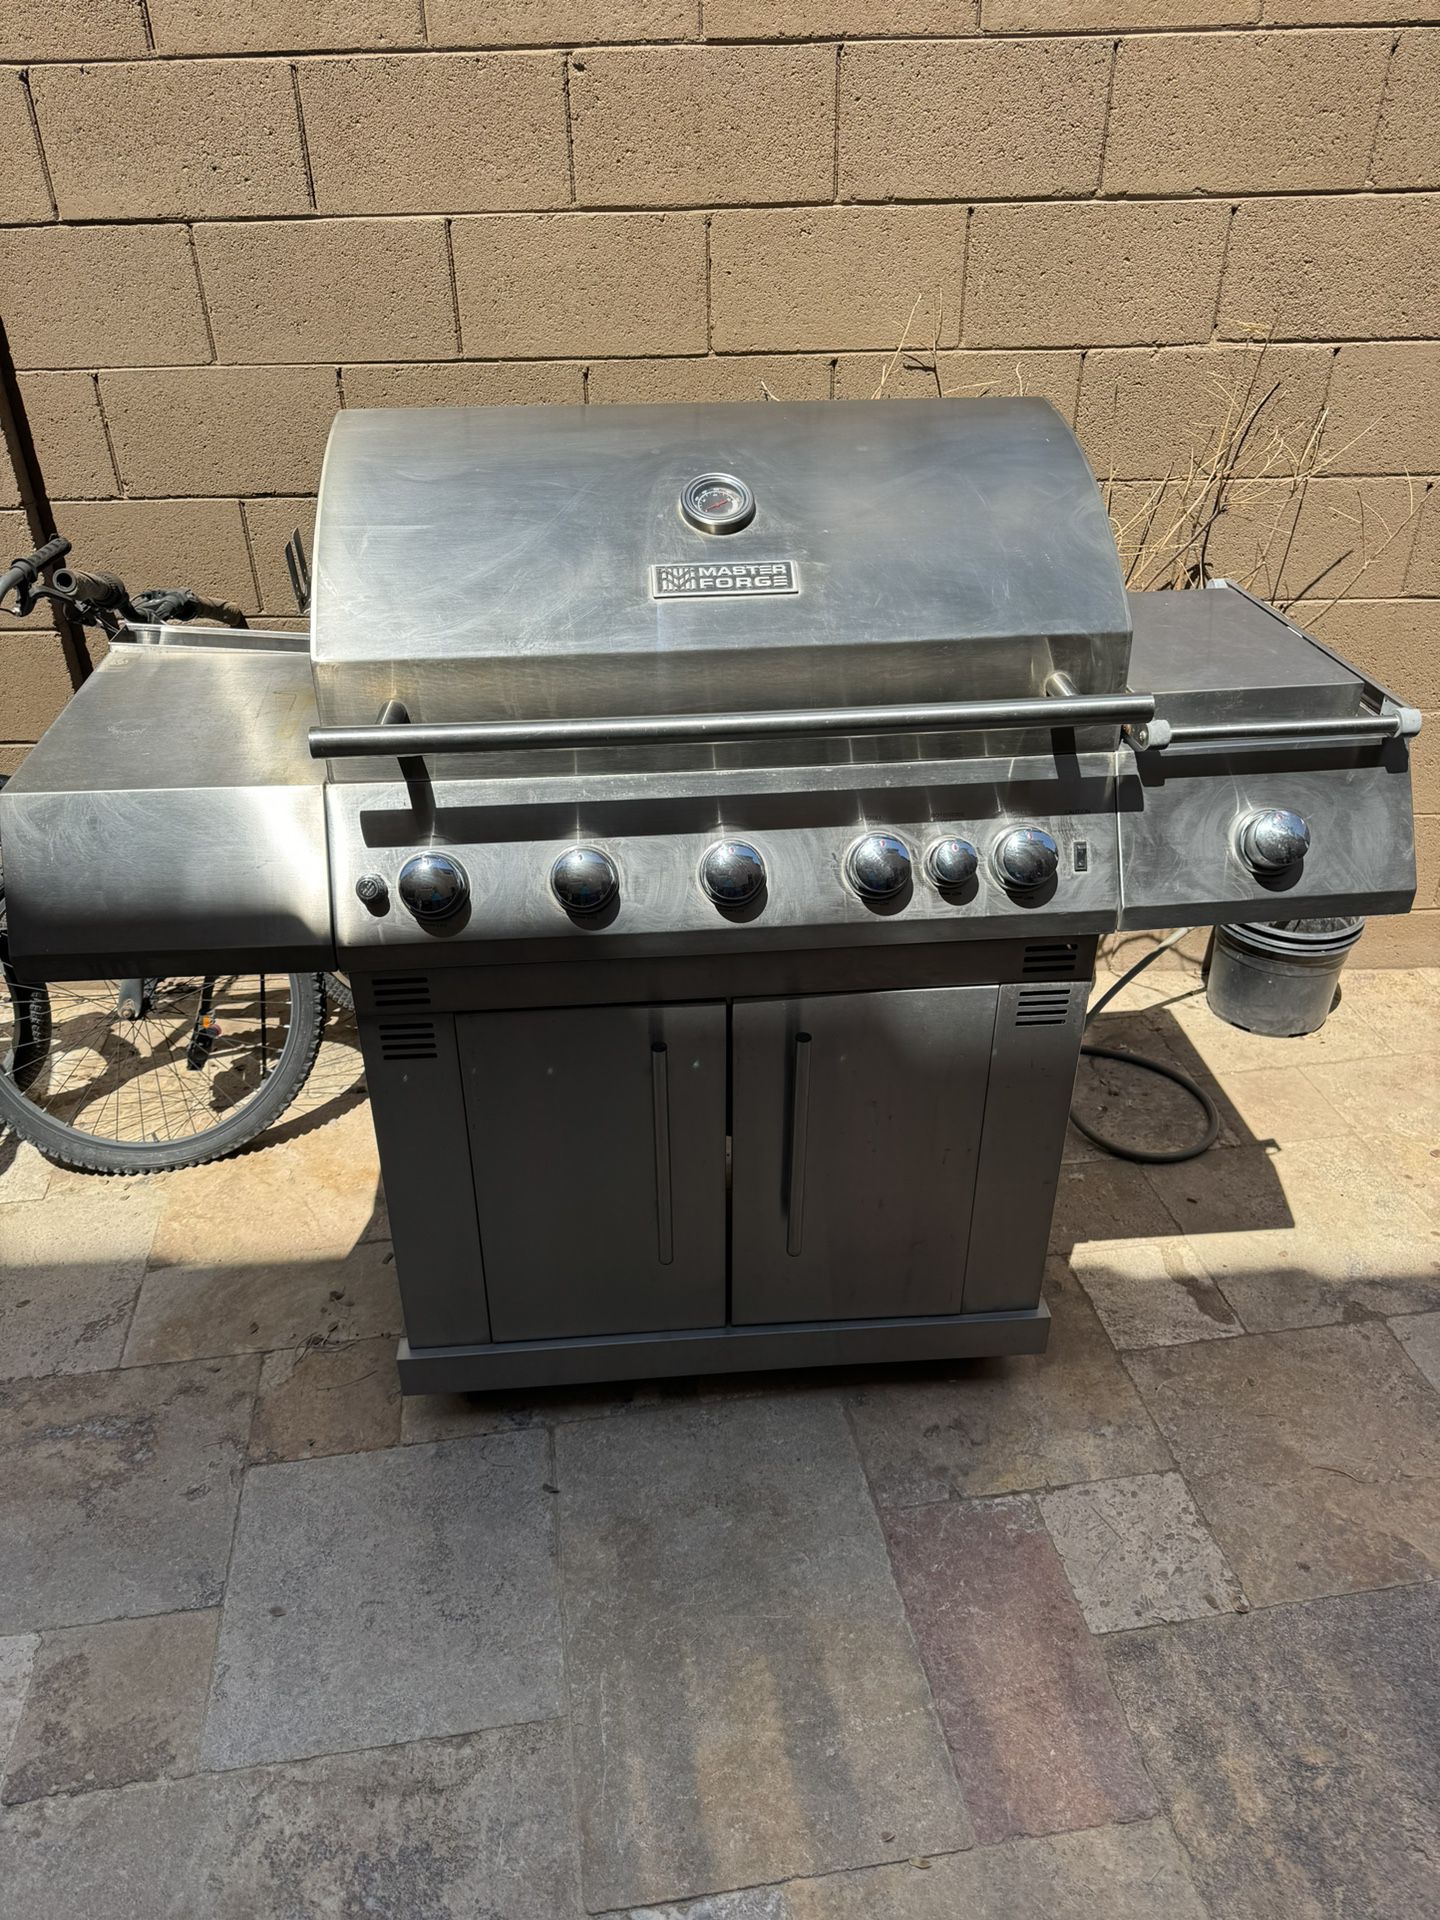 Gas Barbecue Grill Bbq. Stainless